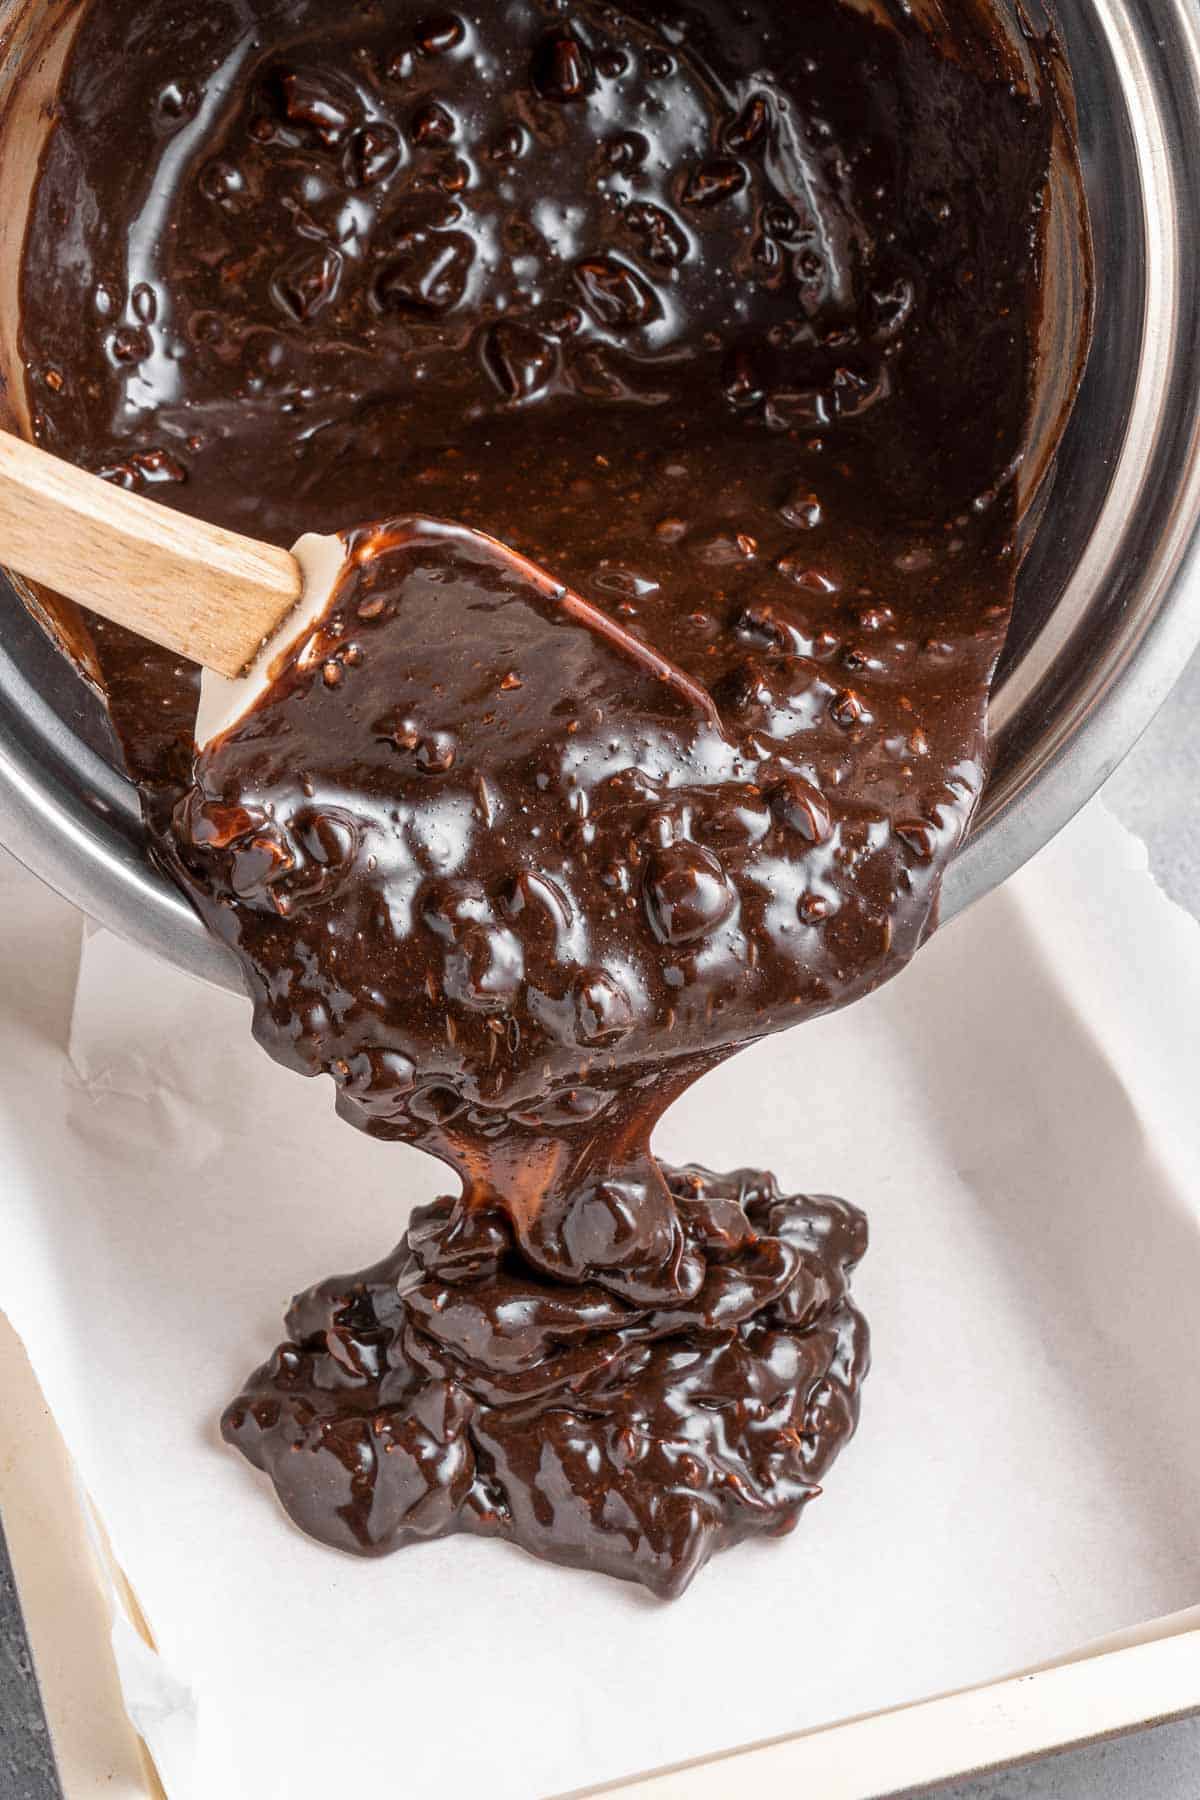 Chocolate fudge batter being poured into a square pan with a wooden spoon.